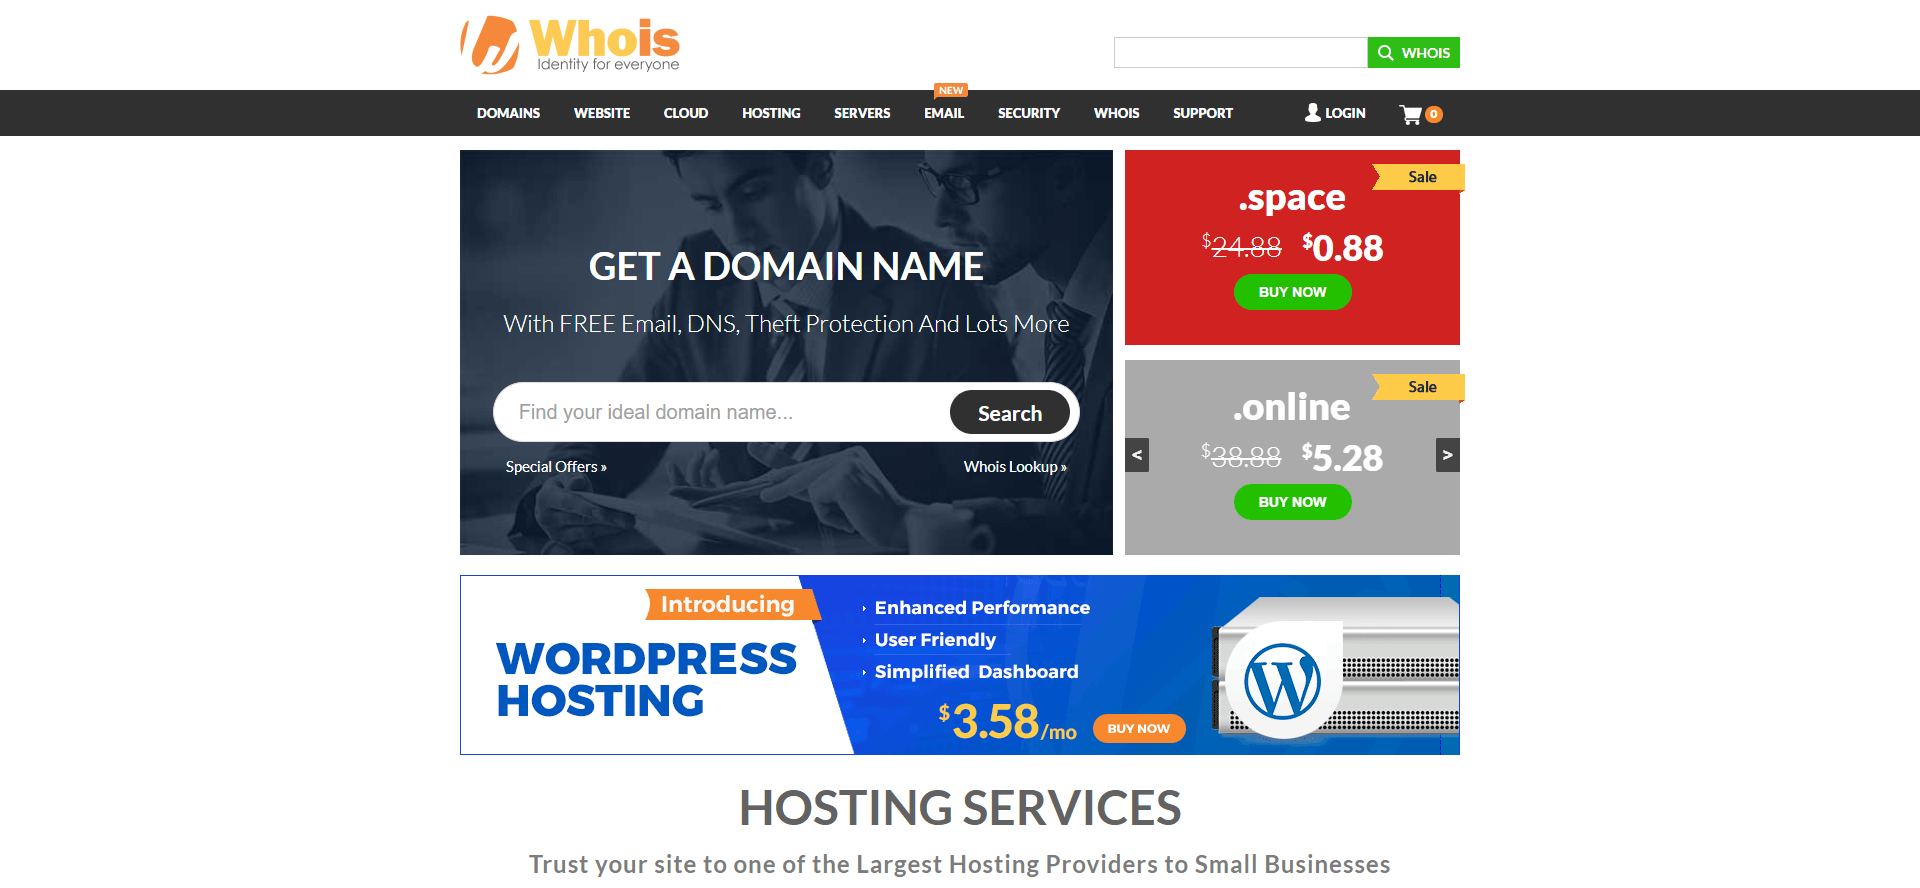 The landing page of Whois